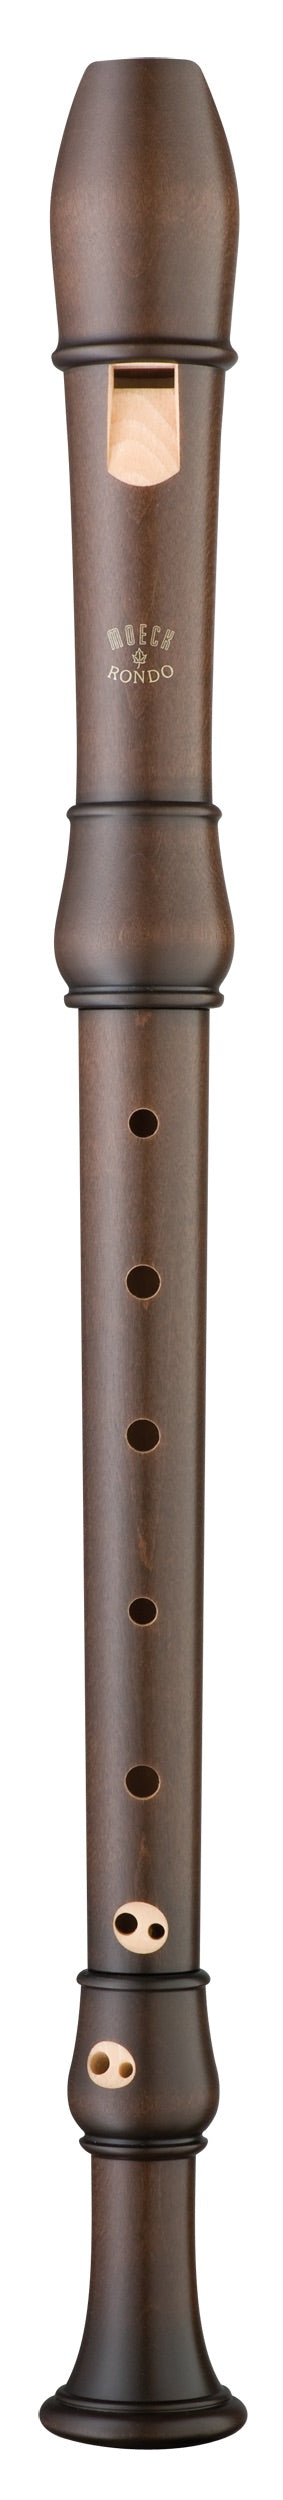 MOE2301 Moeck Flauto Rondo Alto Recorder in Maple at Early Music Shop